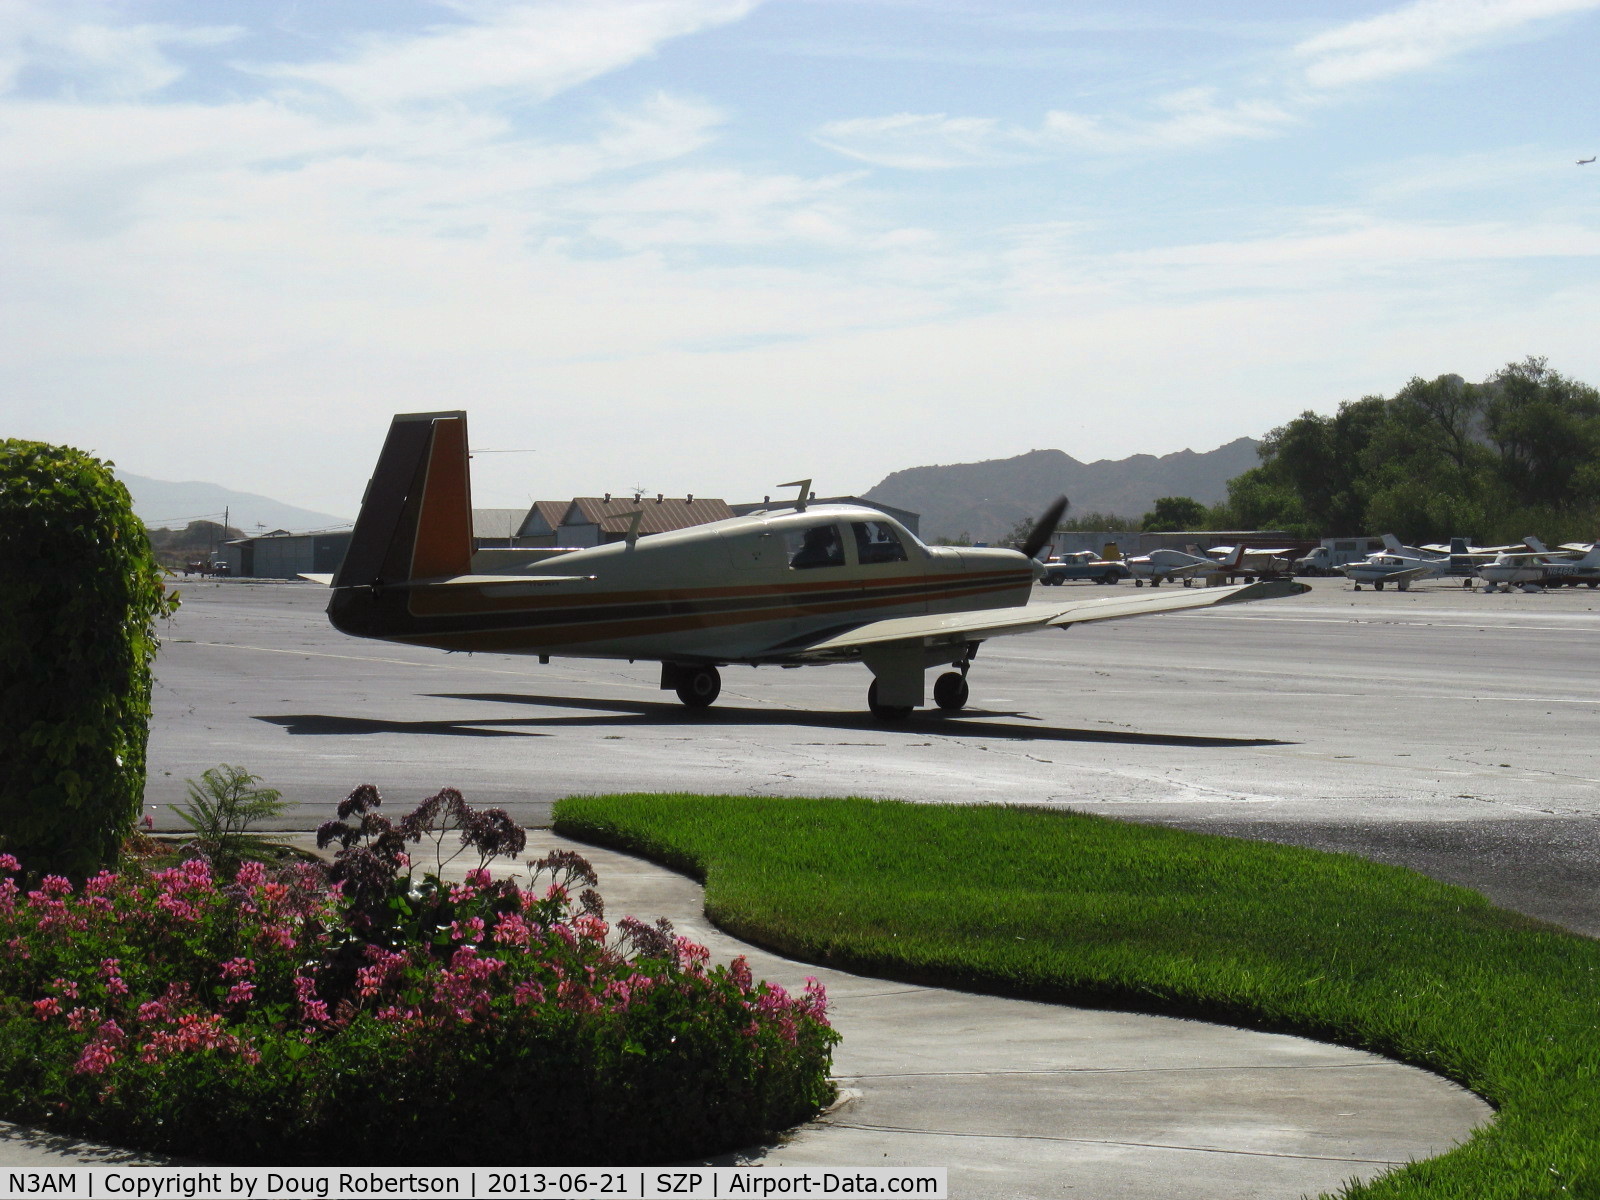 N3AM, 1966 Mooney M20E C/N 1013, 1966 Mooney M20E SUPER 21, Lycoming IO-360-A1A 200 Hp, taxi to 22 after refueling